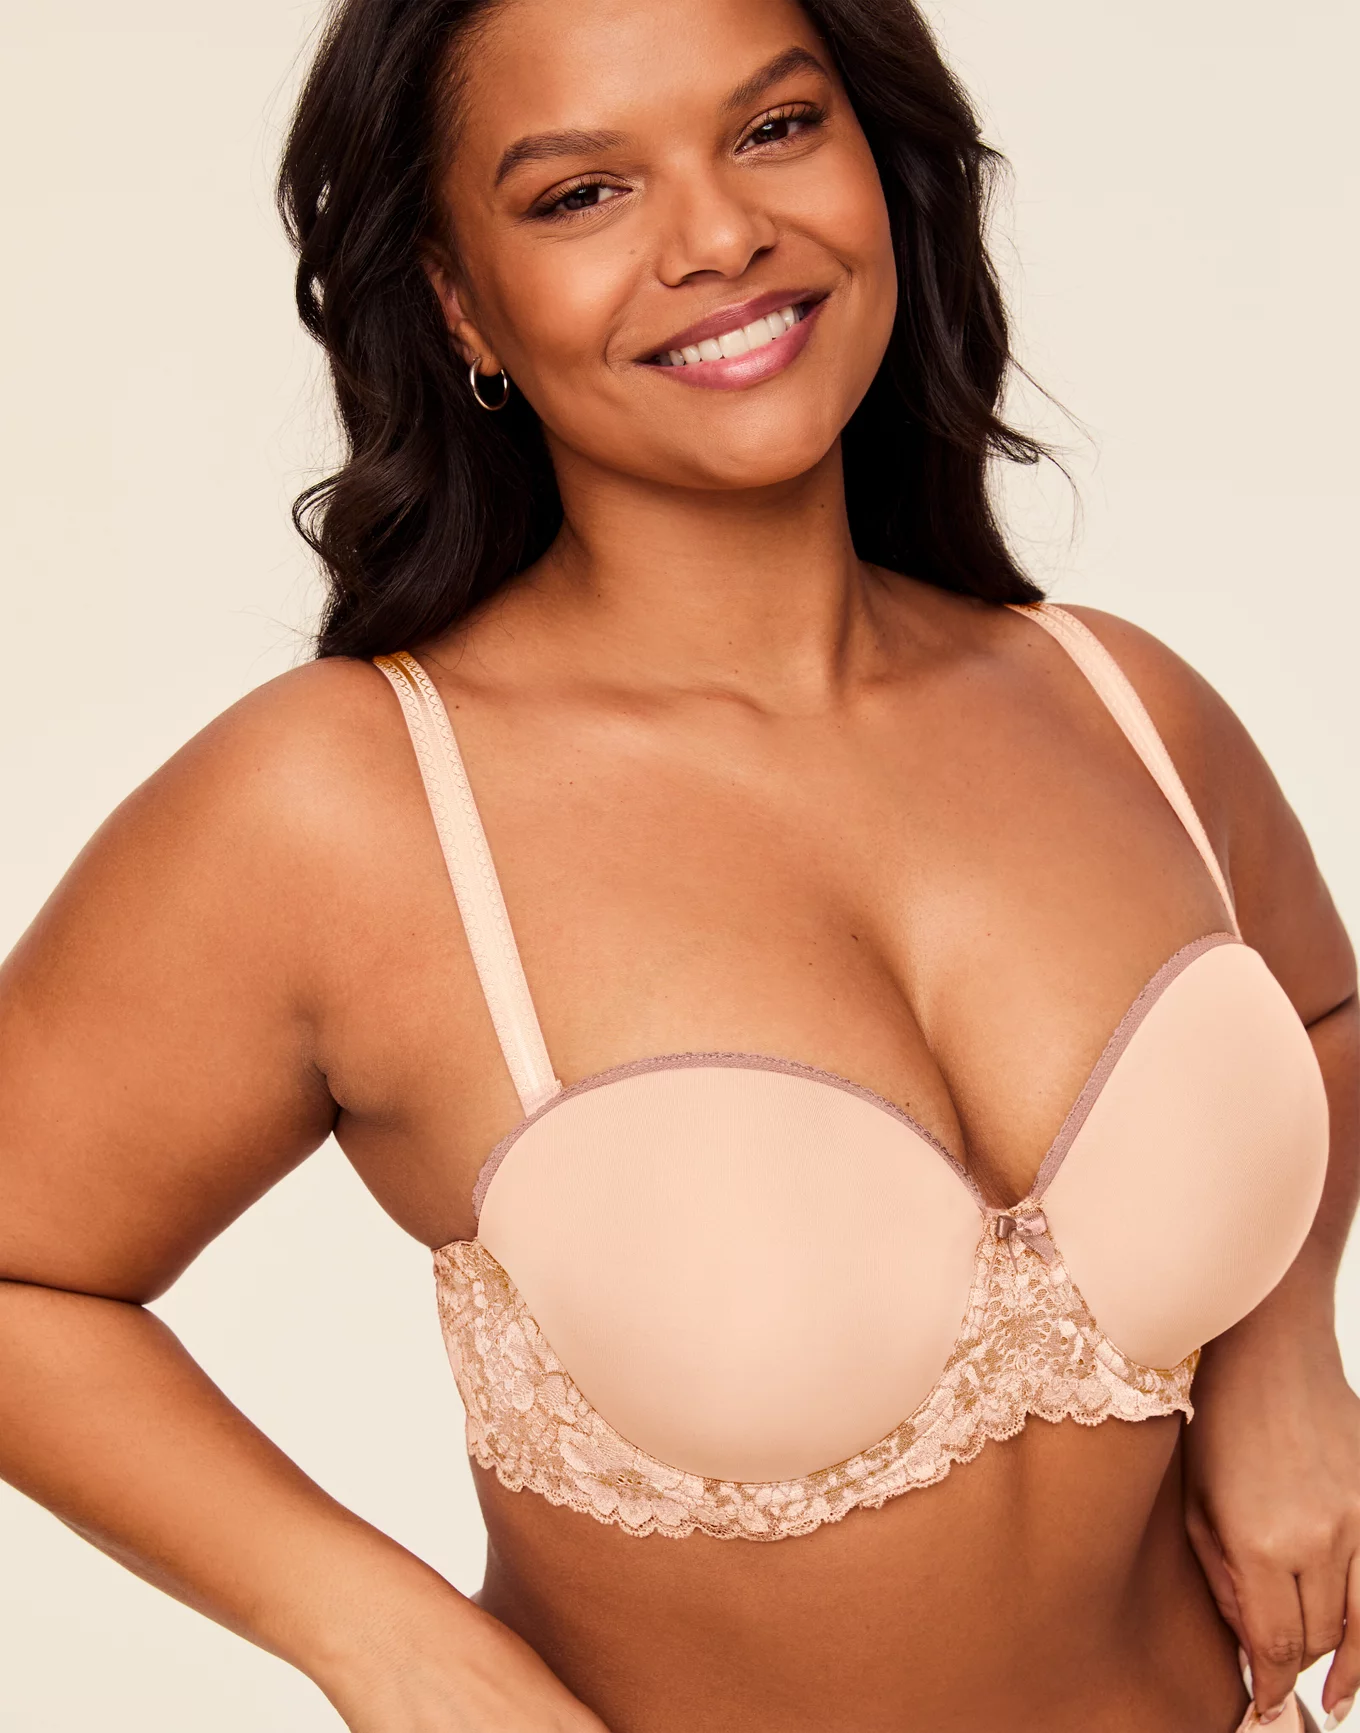 Exclare Women's Seamless Bandeau Unlined Underwire Minimizer Strapless Bra  for Large Bust(Beige,38DDD)